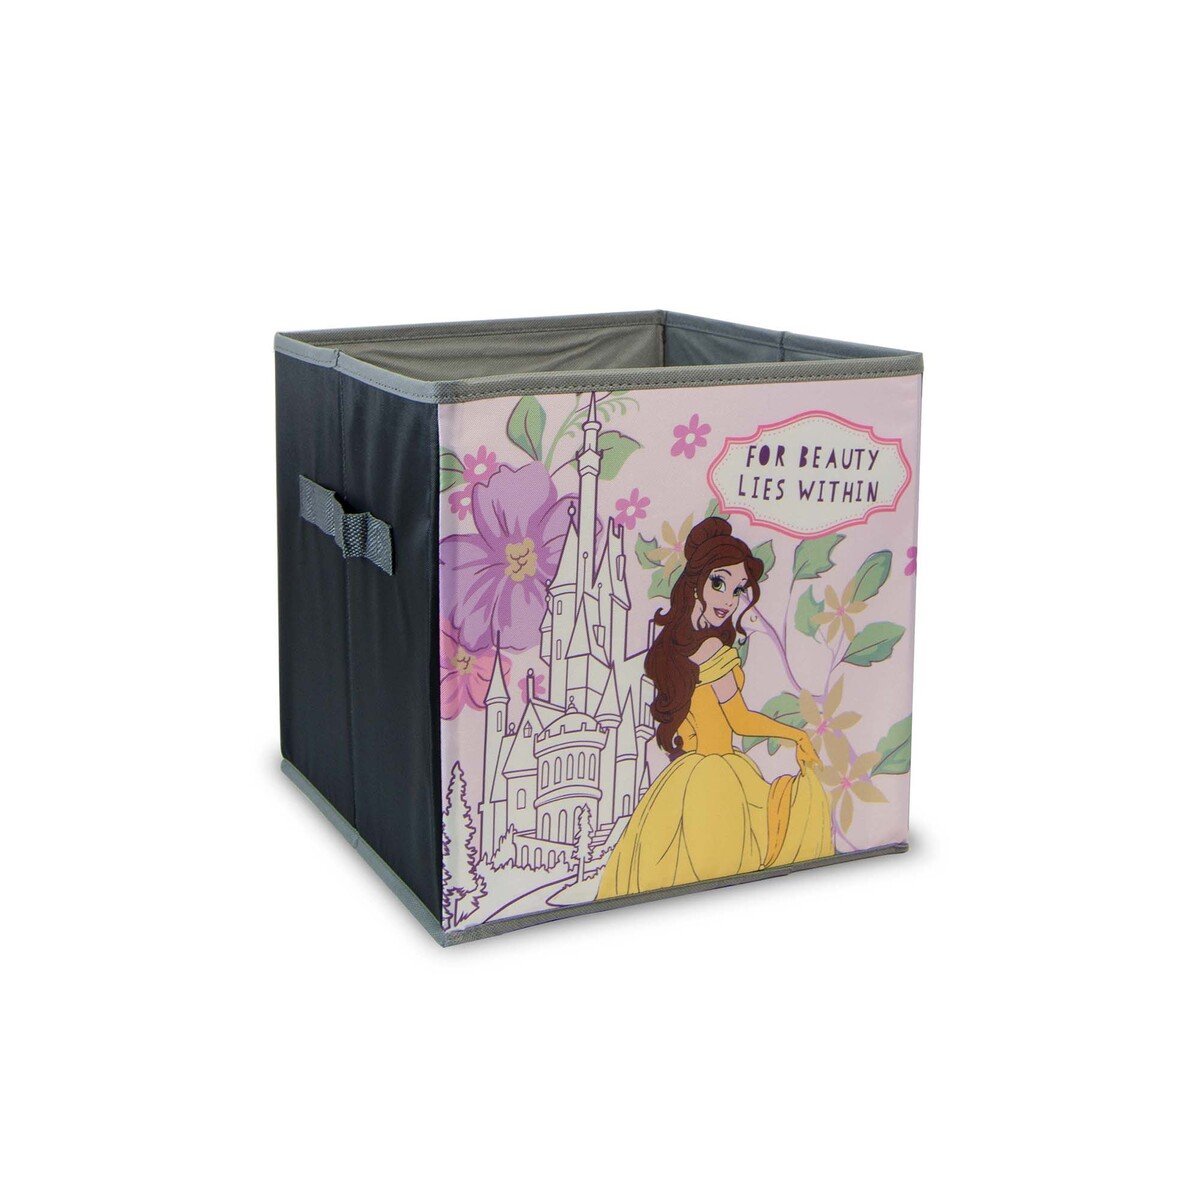 Princess Collapsible Storage Box Without Lids, 26.6 cm(LBH), Multicolored, TRHA19293